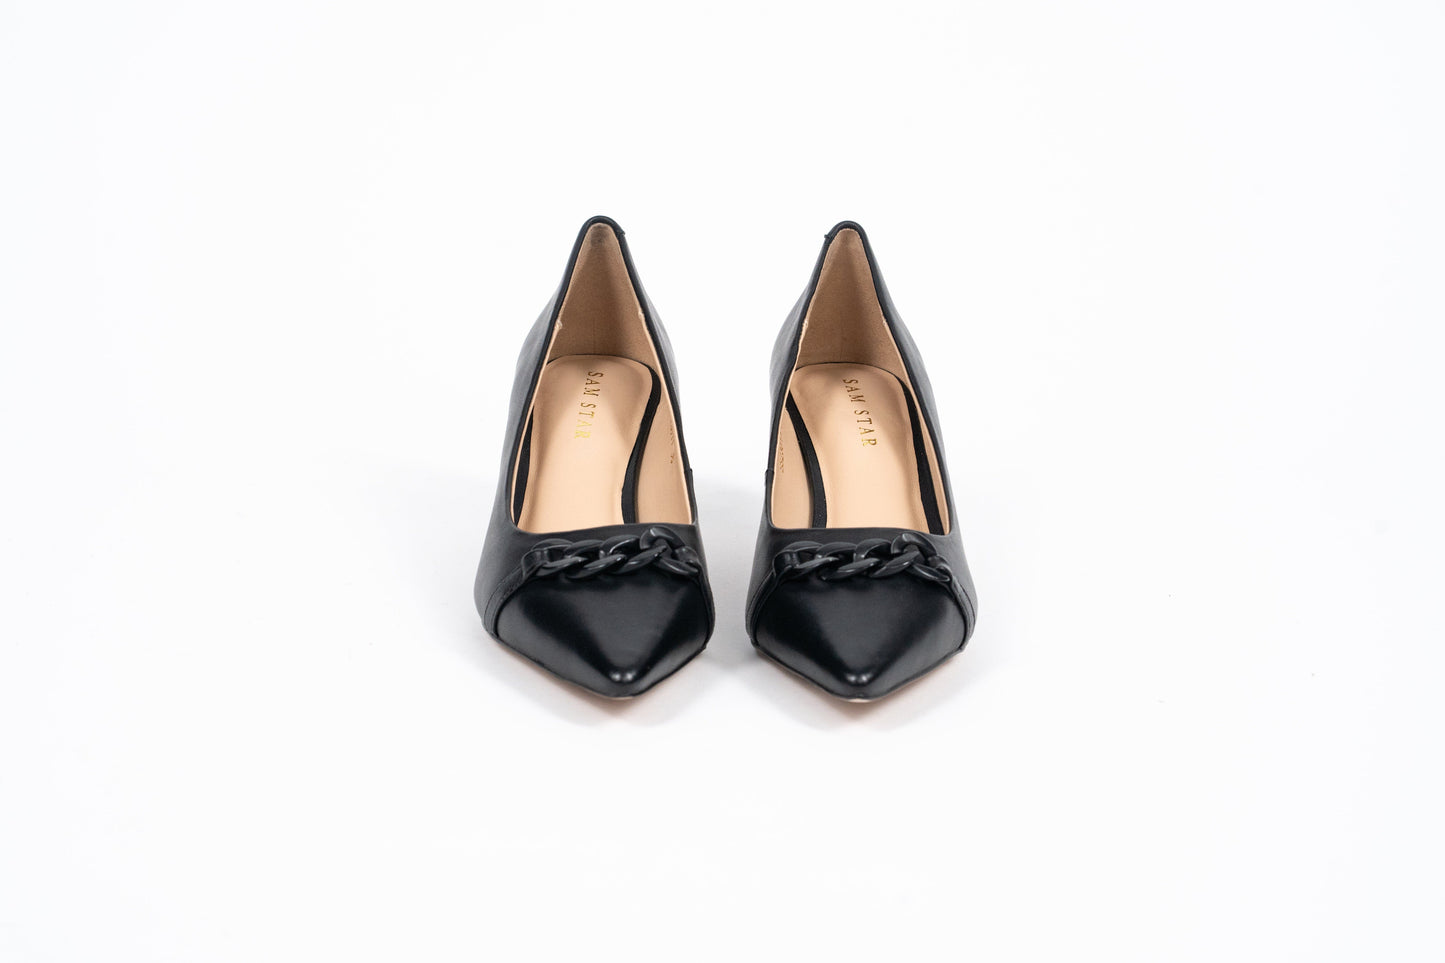 SS23011 Leather court shoes with chain detail - Black (New Arrival) ladies shoes Sam Star shoes Black 37/4 